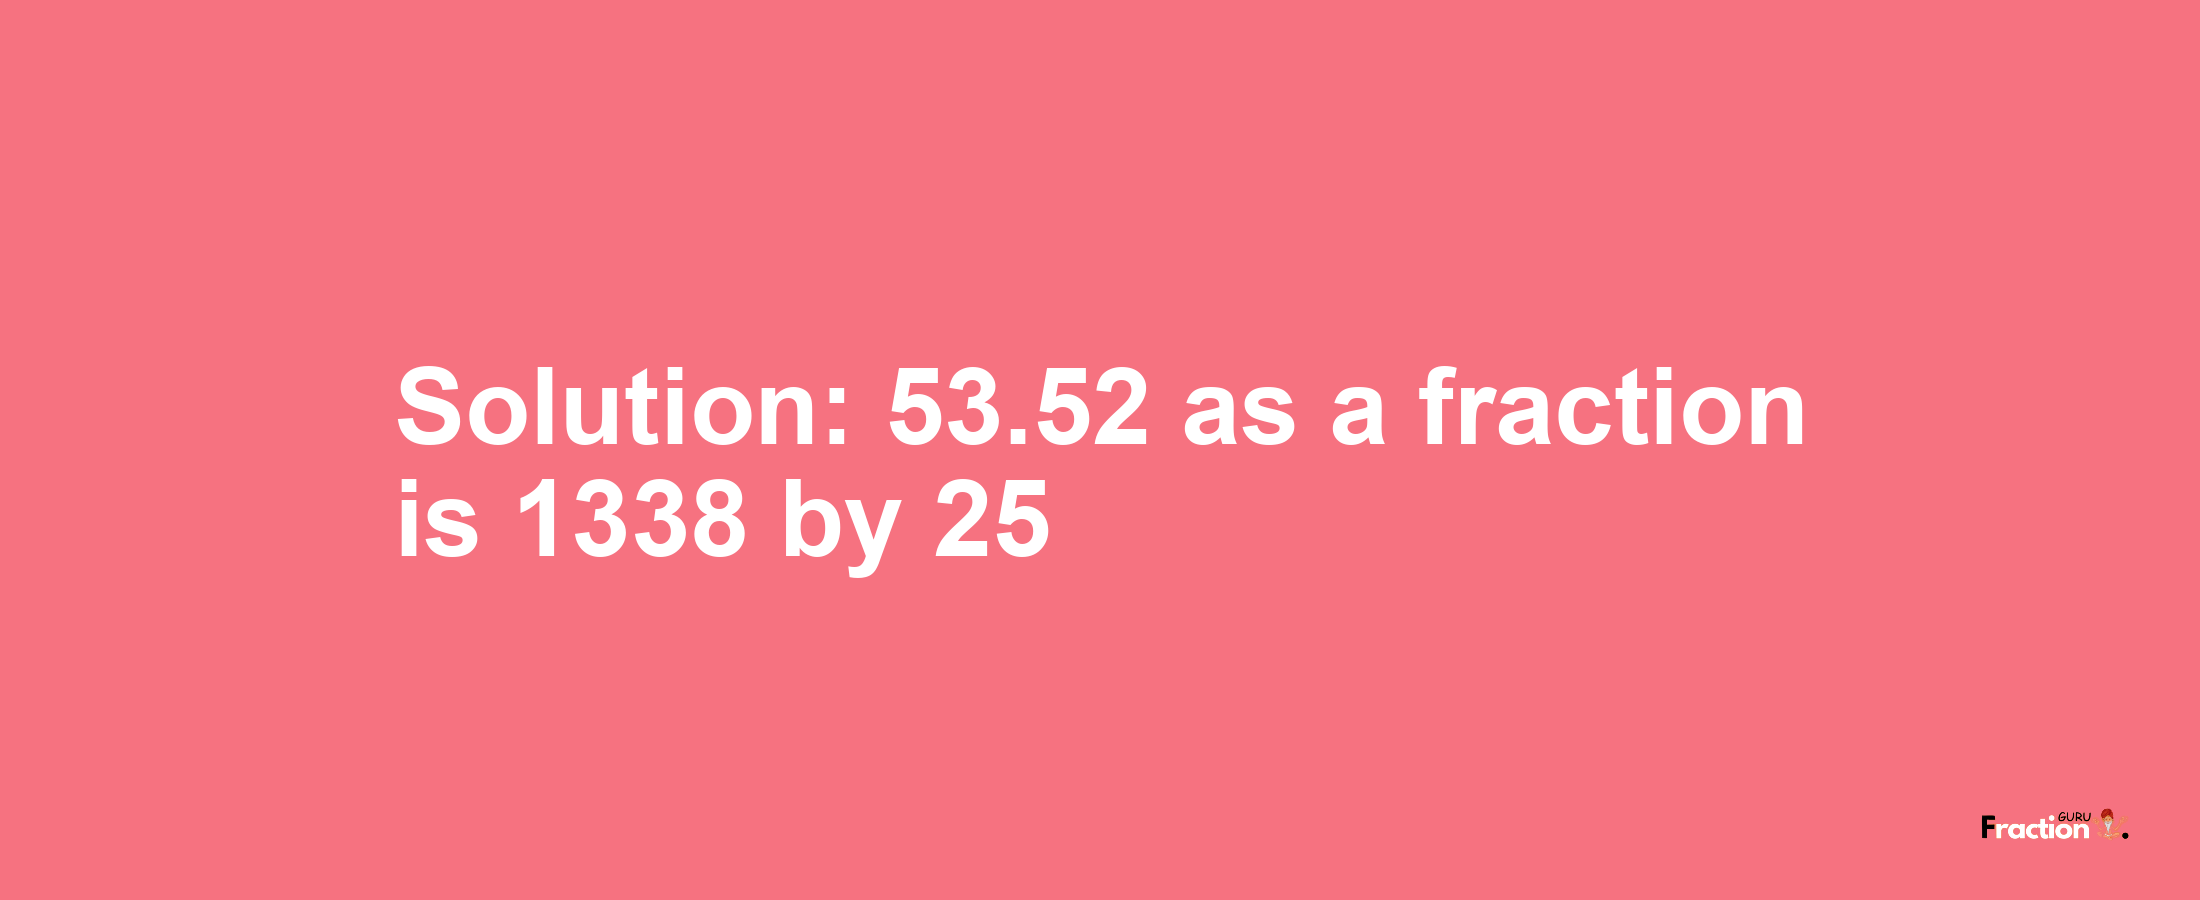 Solution:53.52 as a fraction is 1338/25